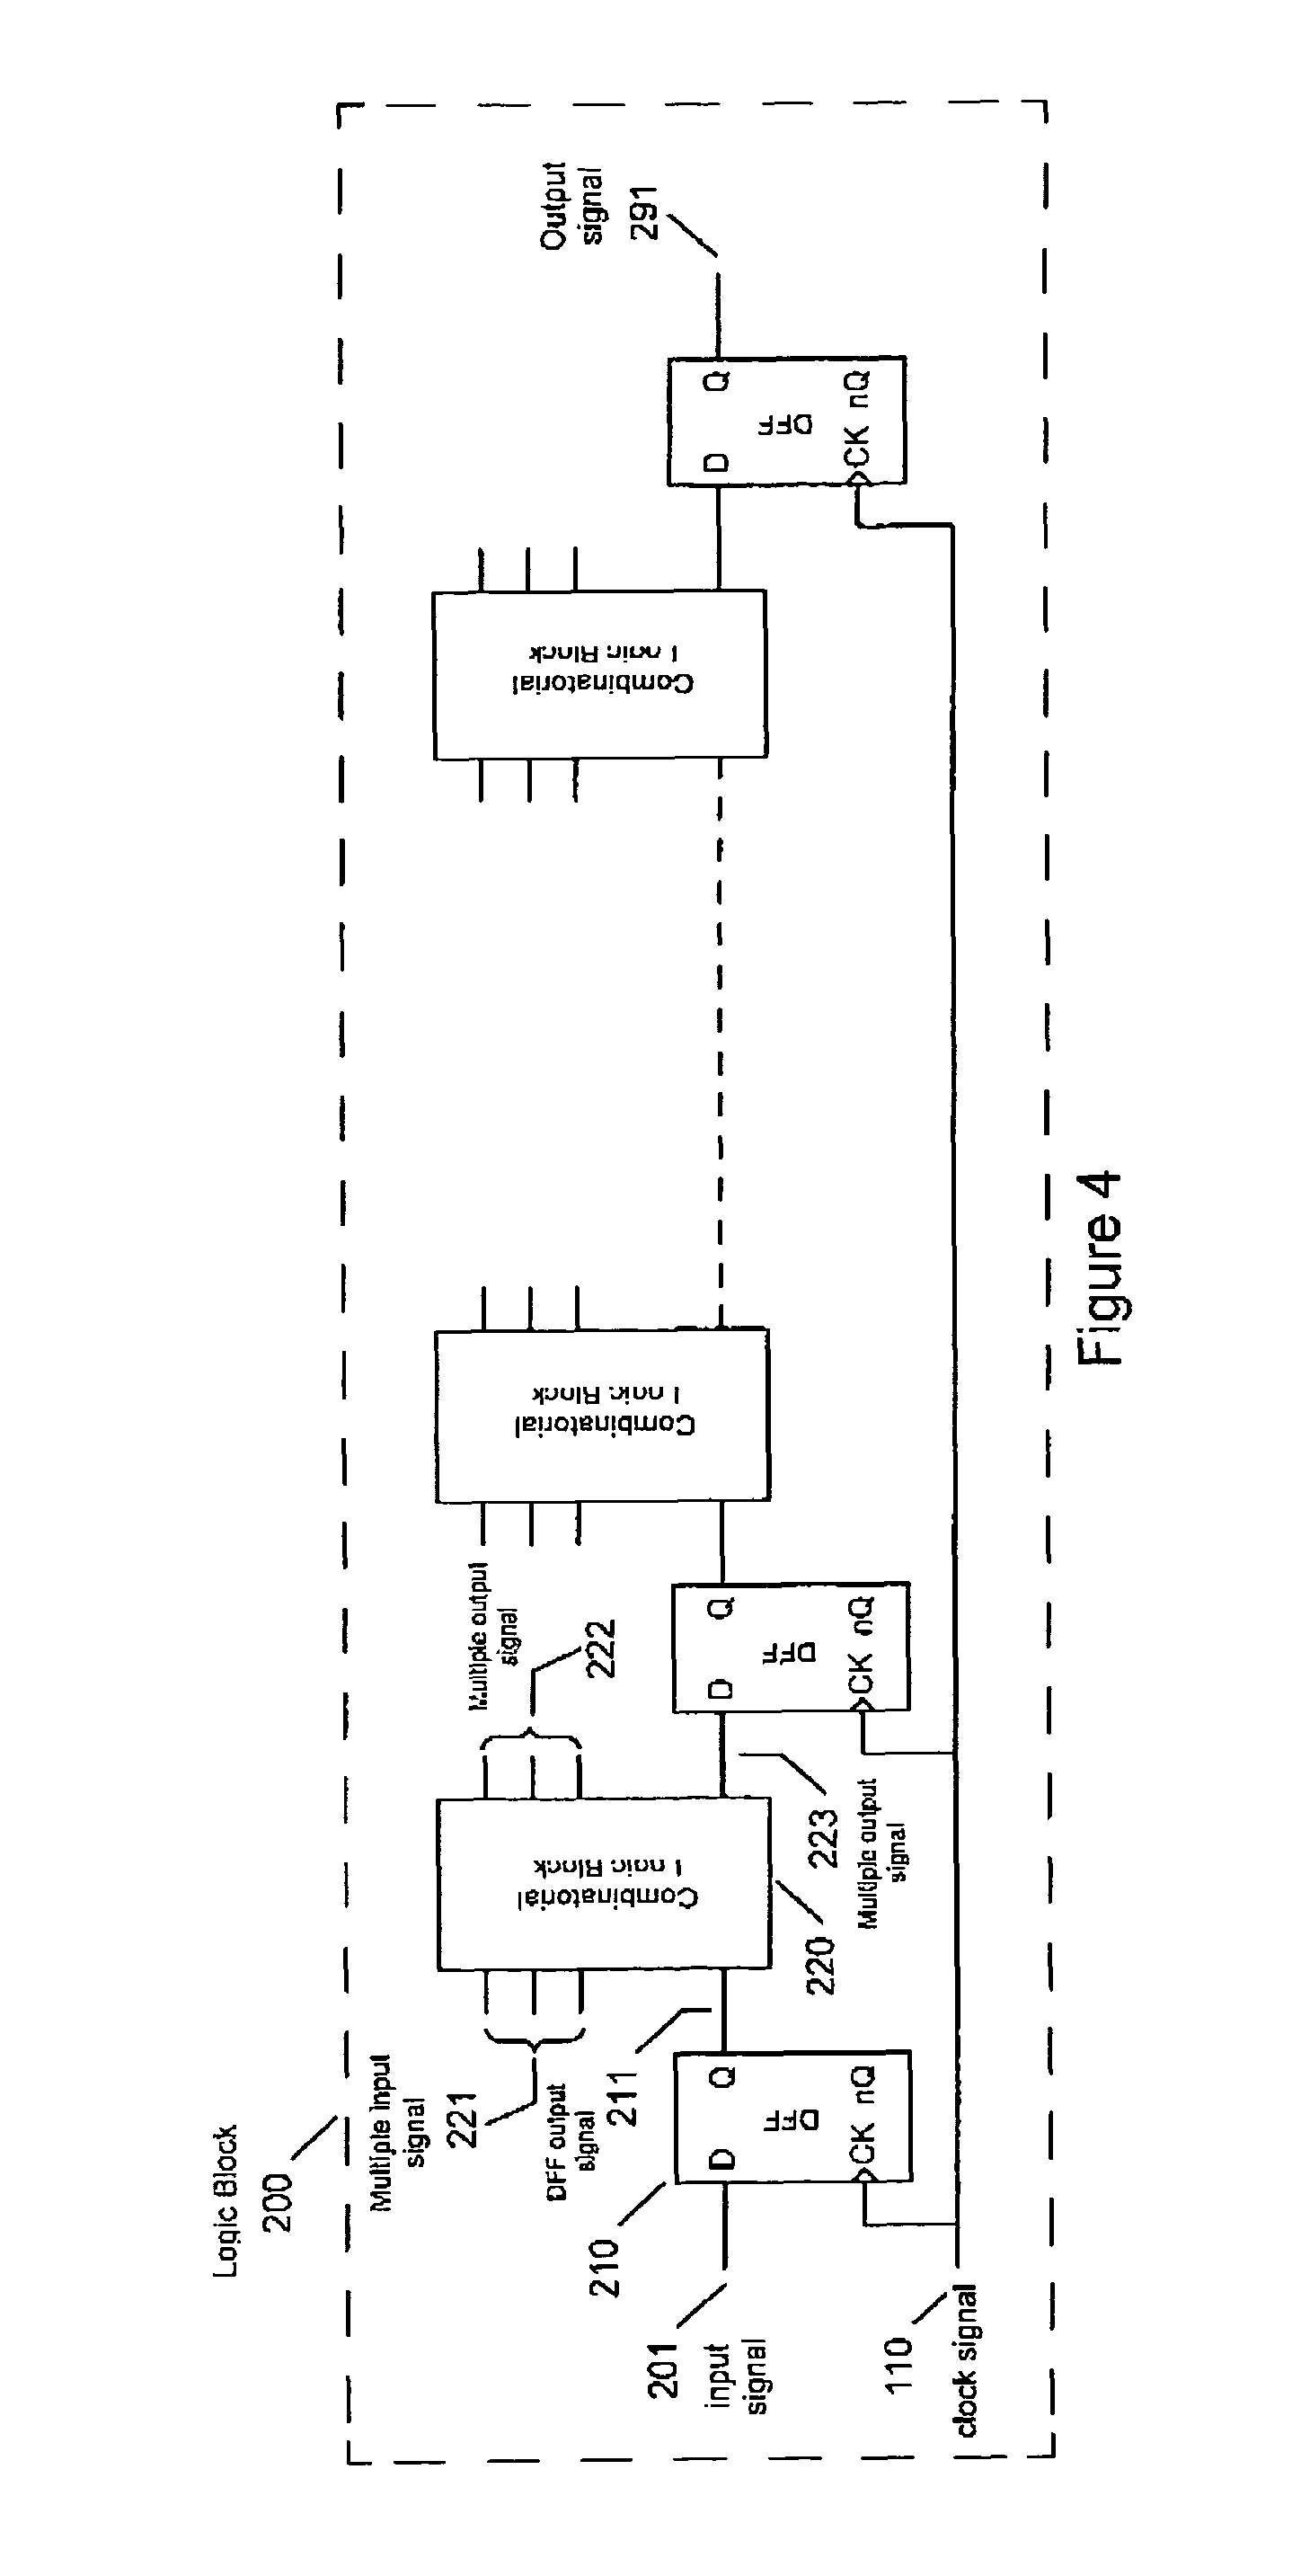 Logic system with resistance to side-channel attack by exhibiting a closed clock-data eye diagram